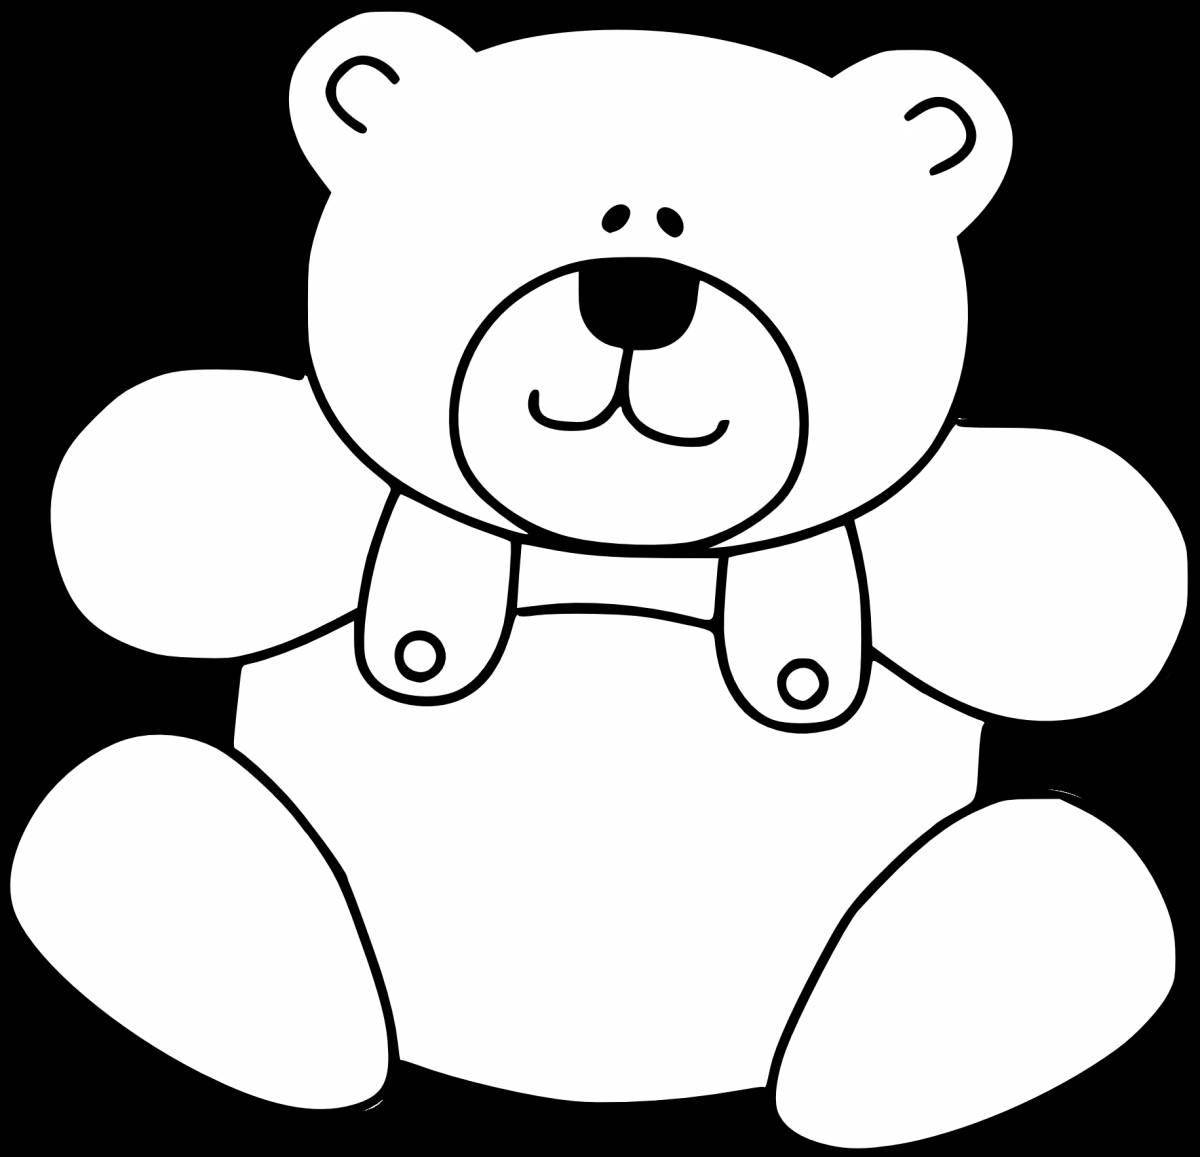 Coloring book shining teddy bear with a bow